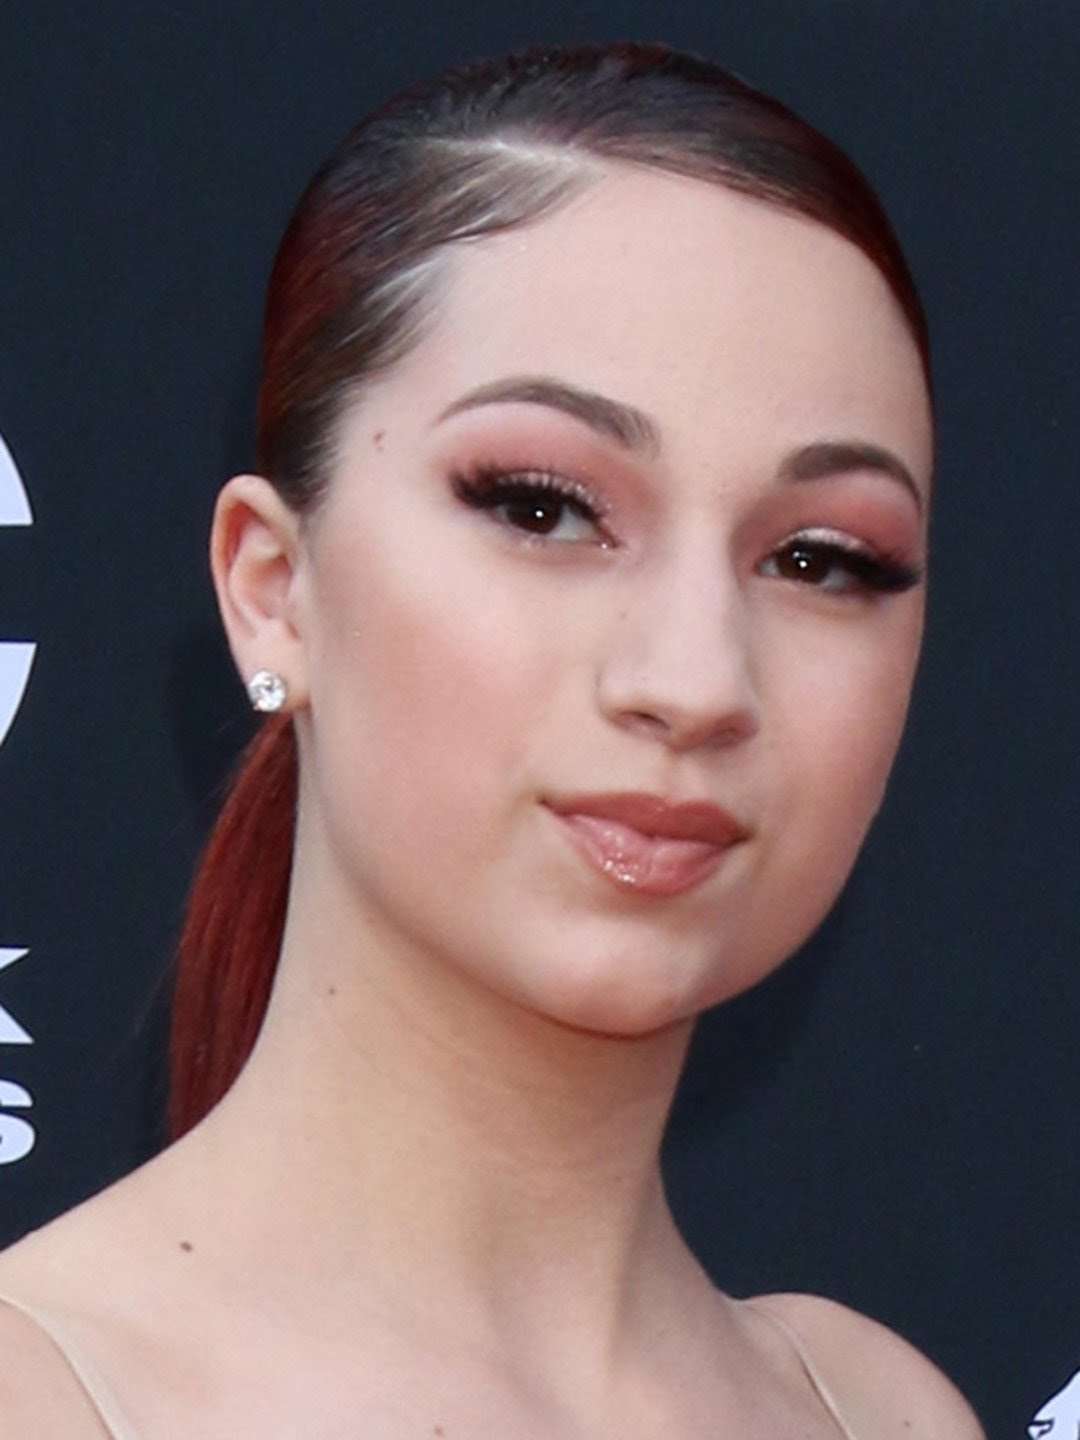 Danielle Bregoli Wiki, Biography, Age, Height, Weight